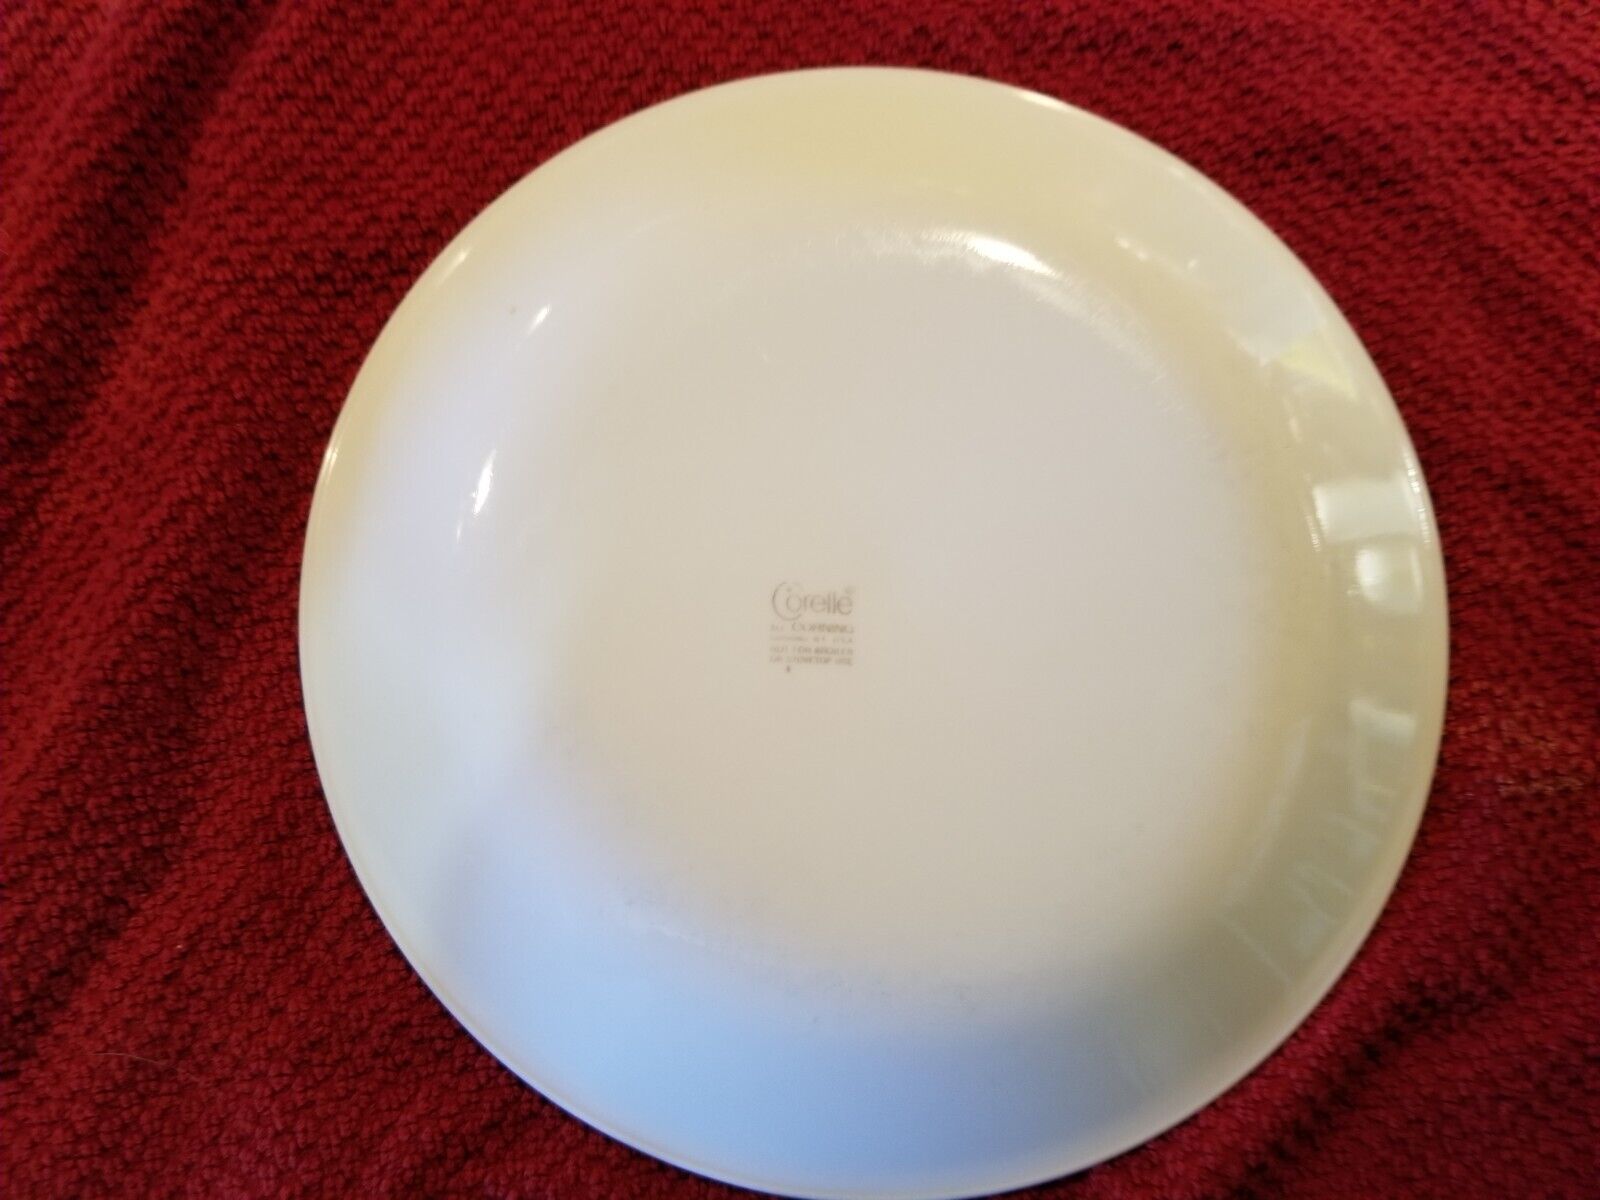 Vintage Corning Ware Corelle Crazy Daisy Plate 8 1/2" - Retired